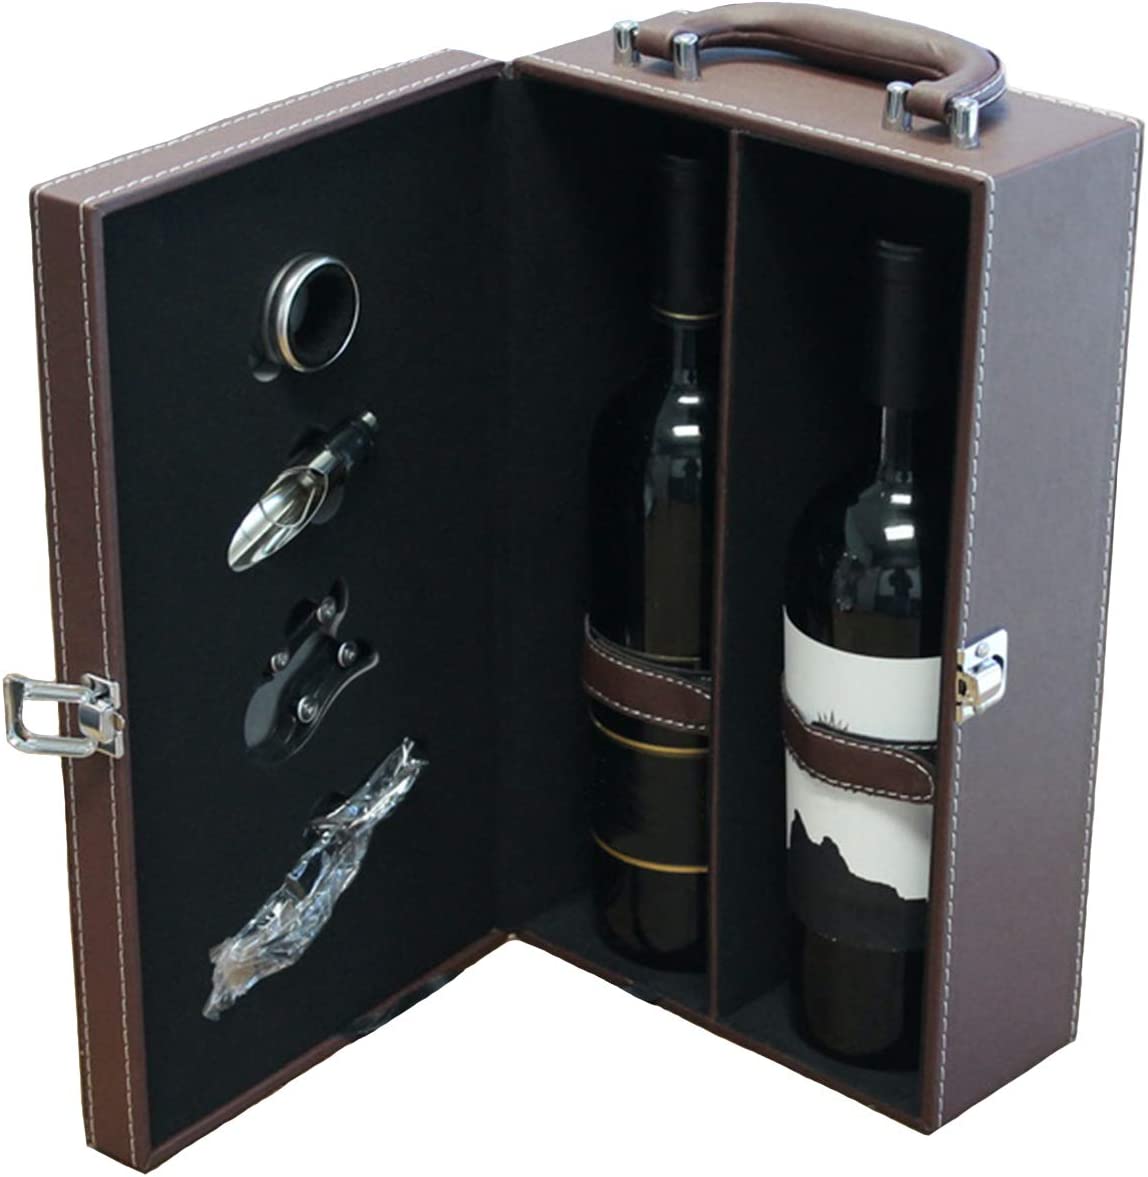 Leather Wine Carrier & Accessories with 2 Bottles of Wine (Brown) - DJW Custom Baskets & Beyond